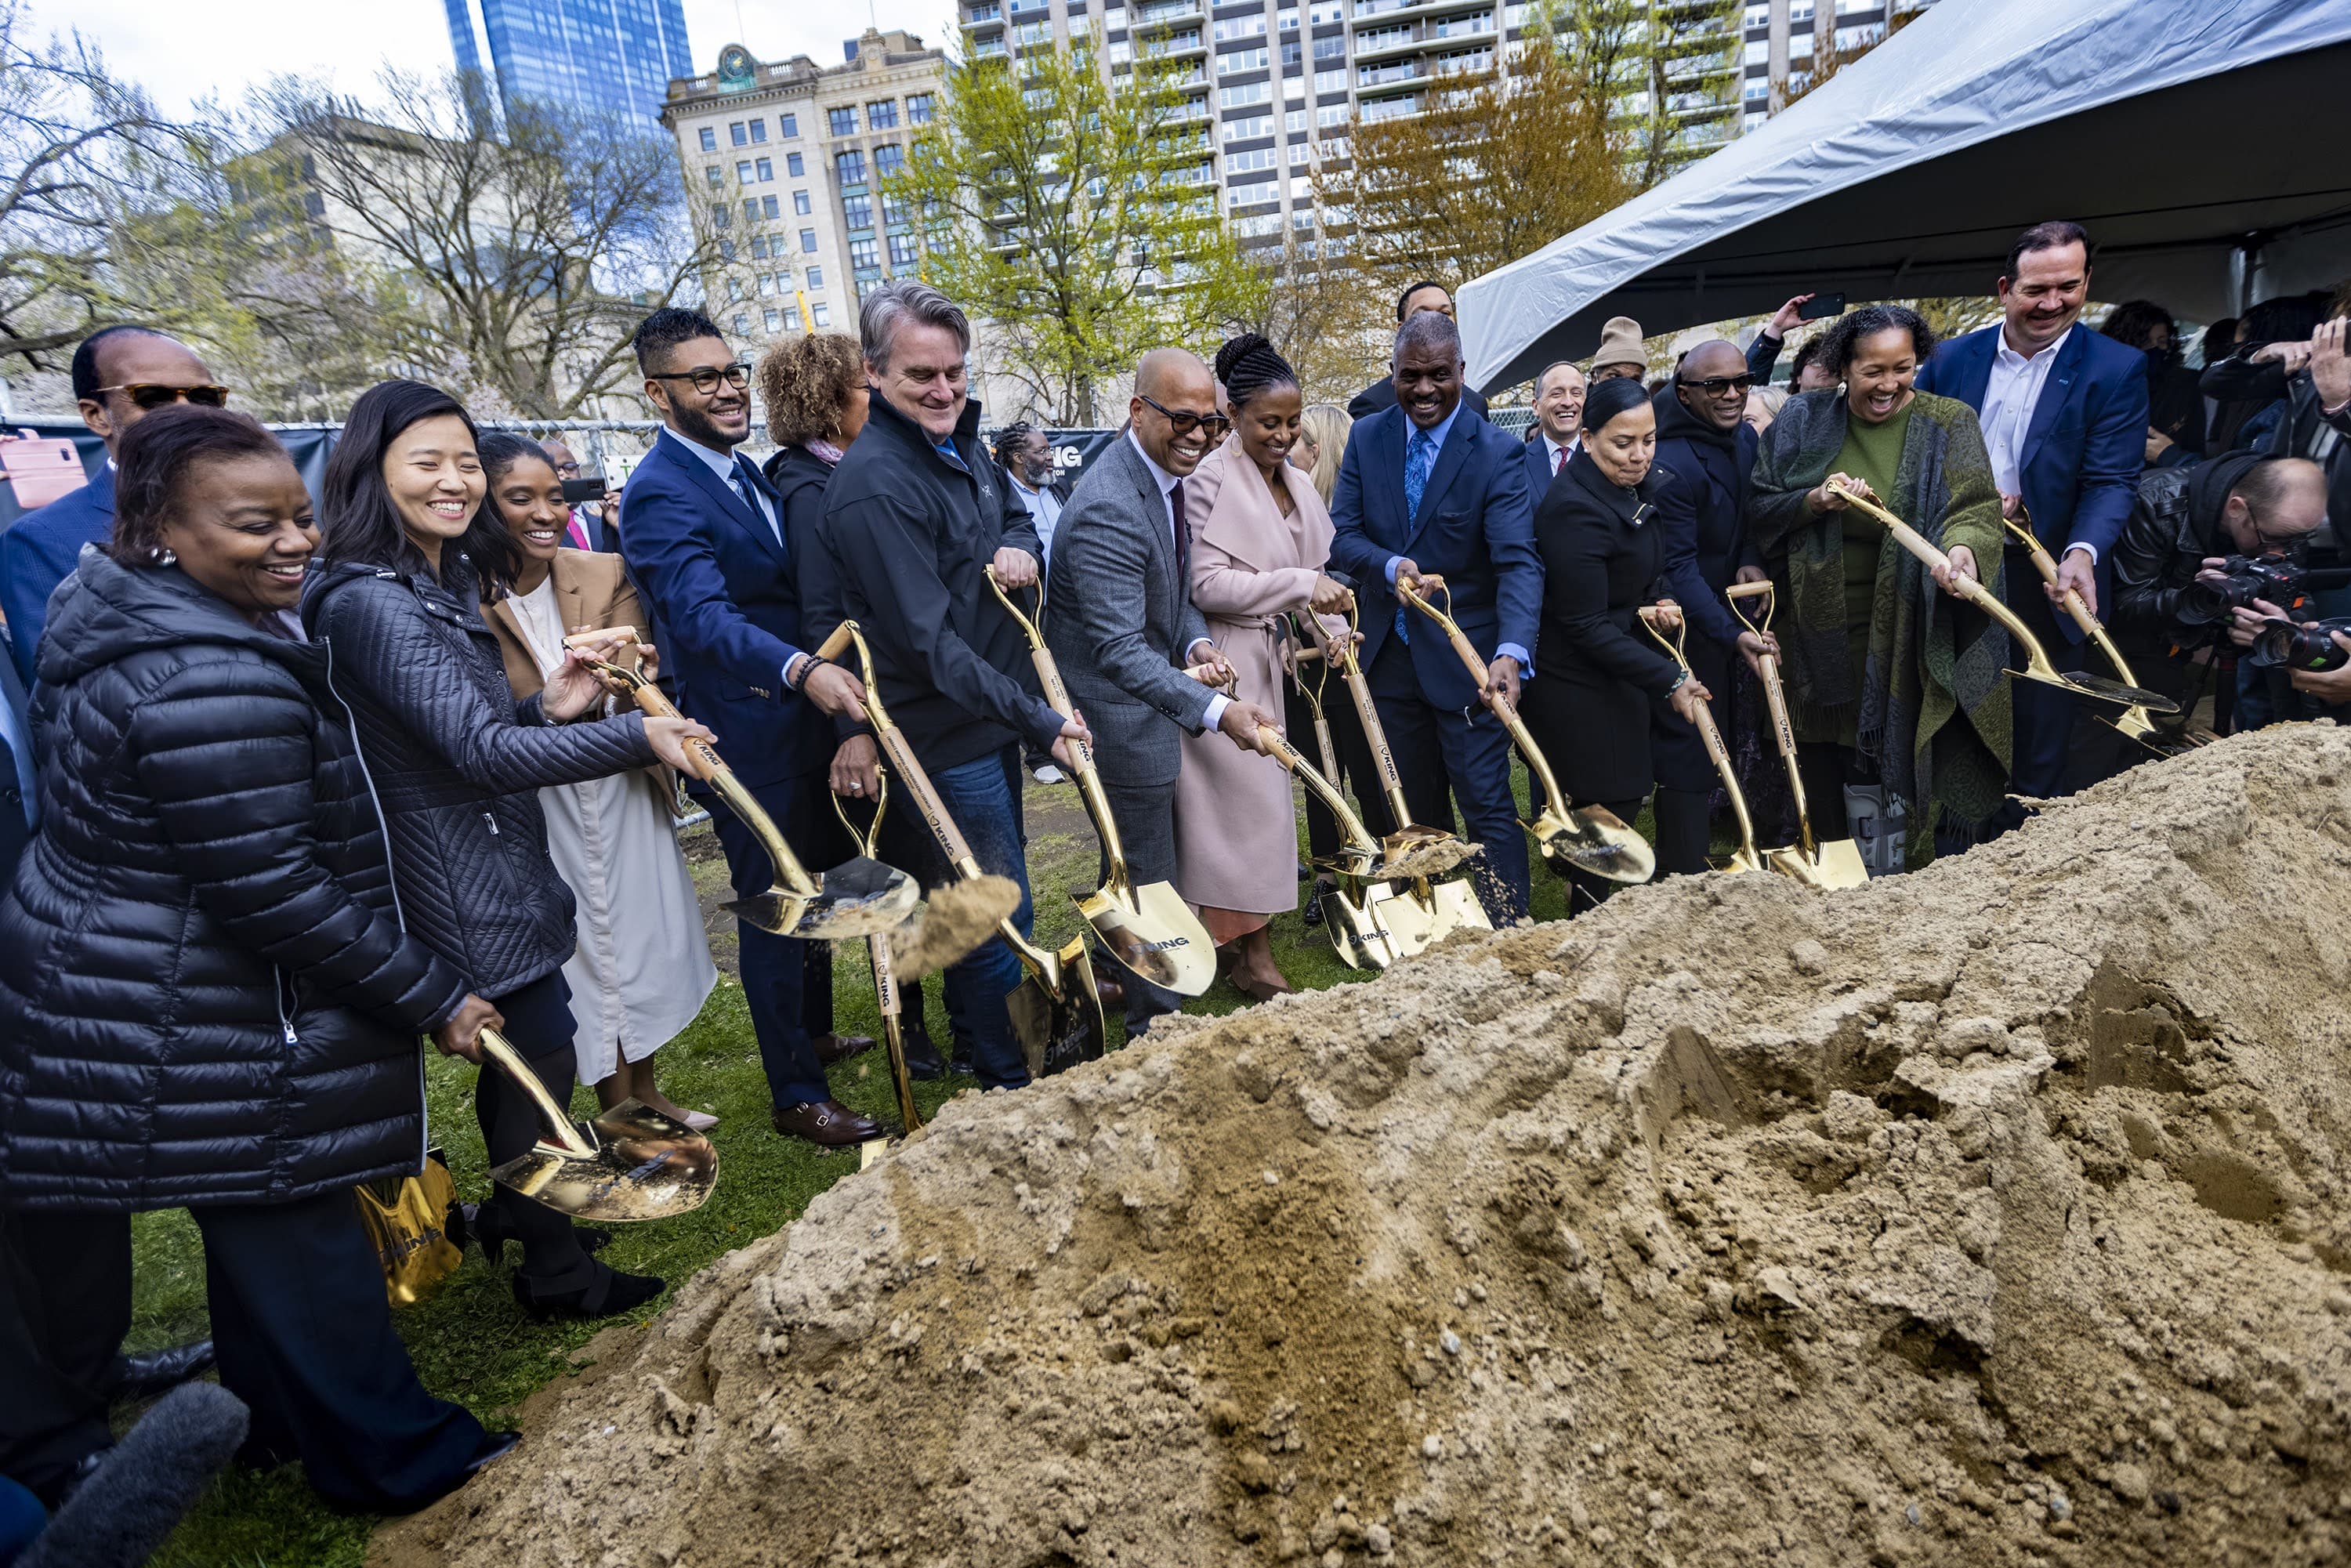 Local politicians, dignitaries and founding members of King Boston ceremoniously break ground for the King Boston memorial, &quot;The Embrace,&quot; at the Boston Common. (Jesse Costa/WBUR)